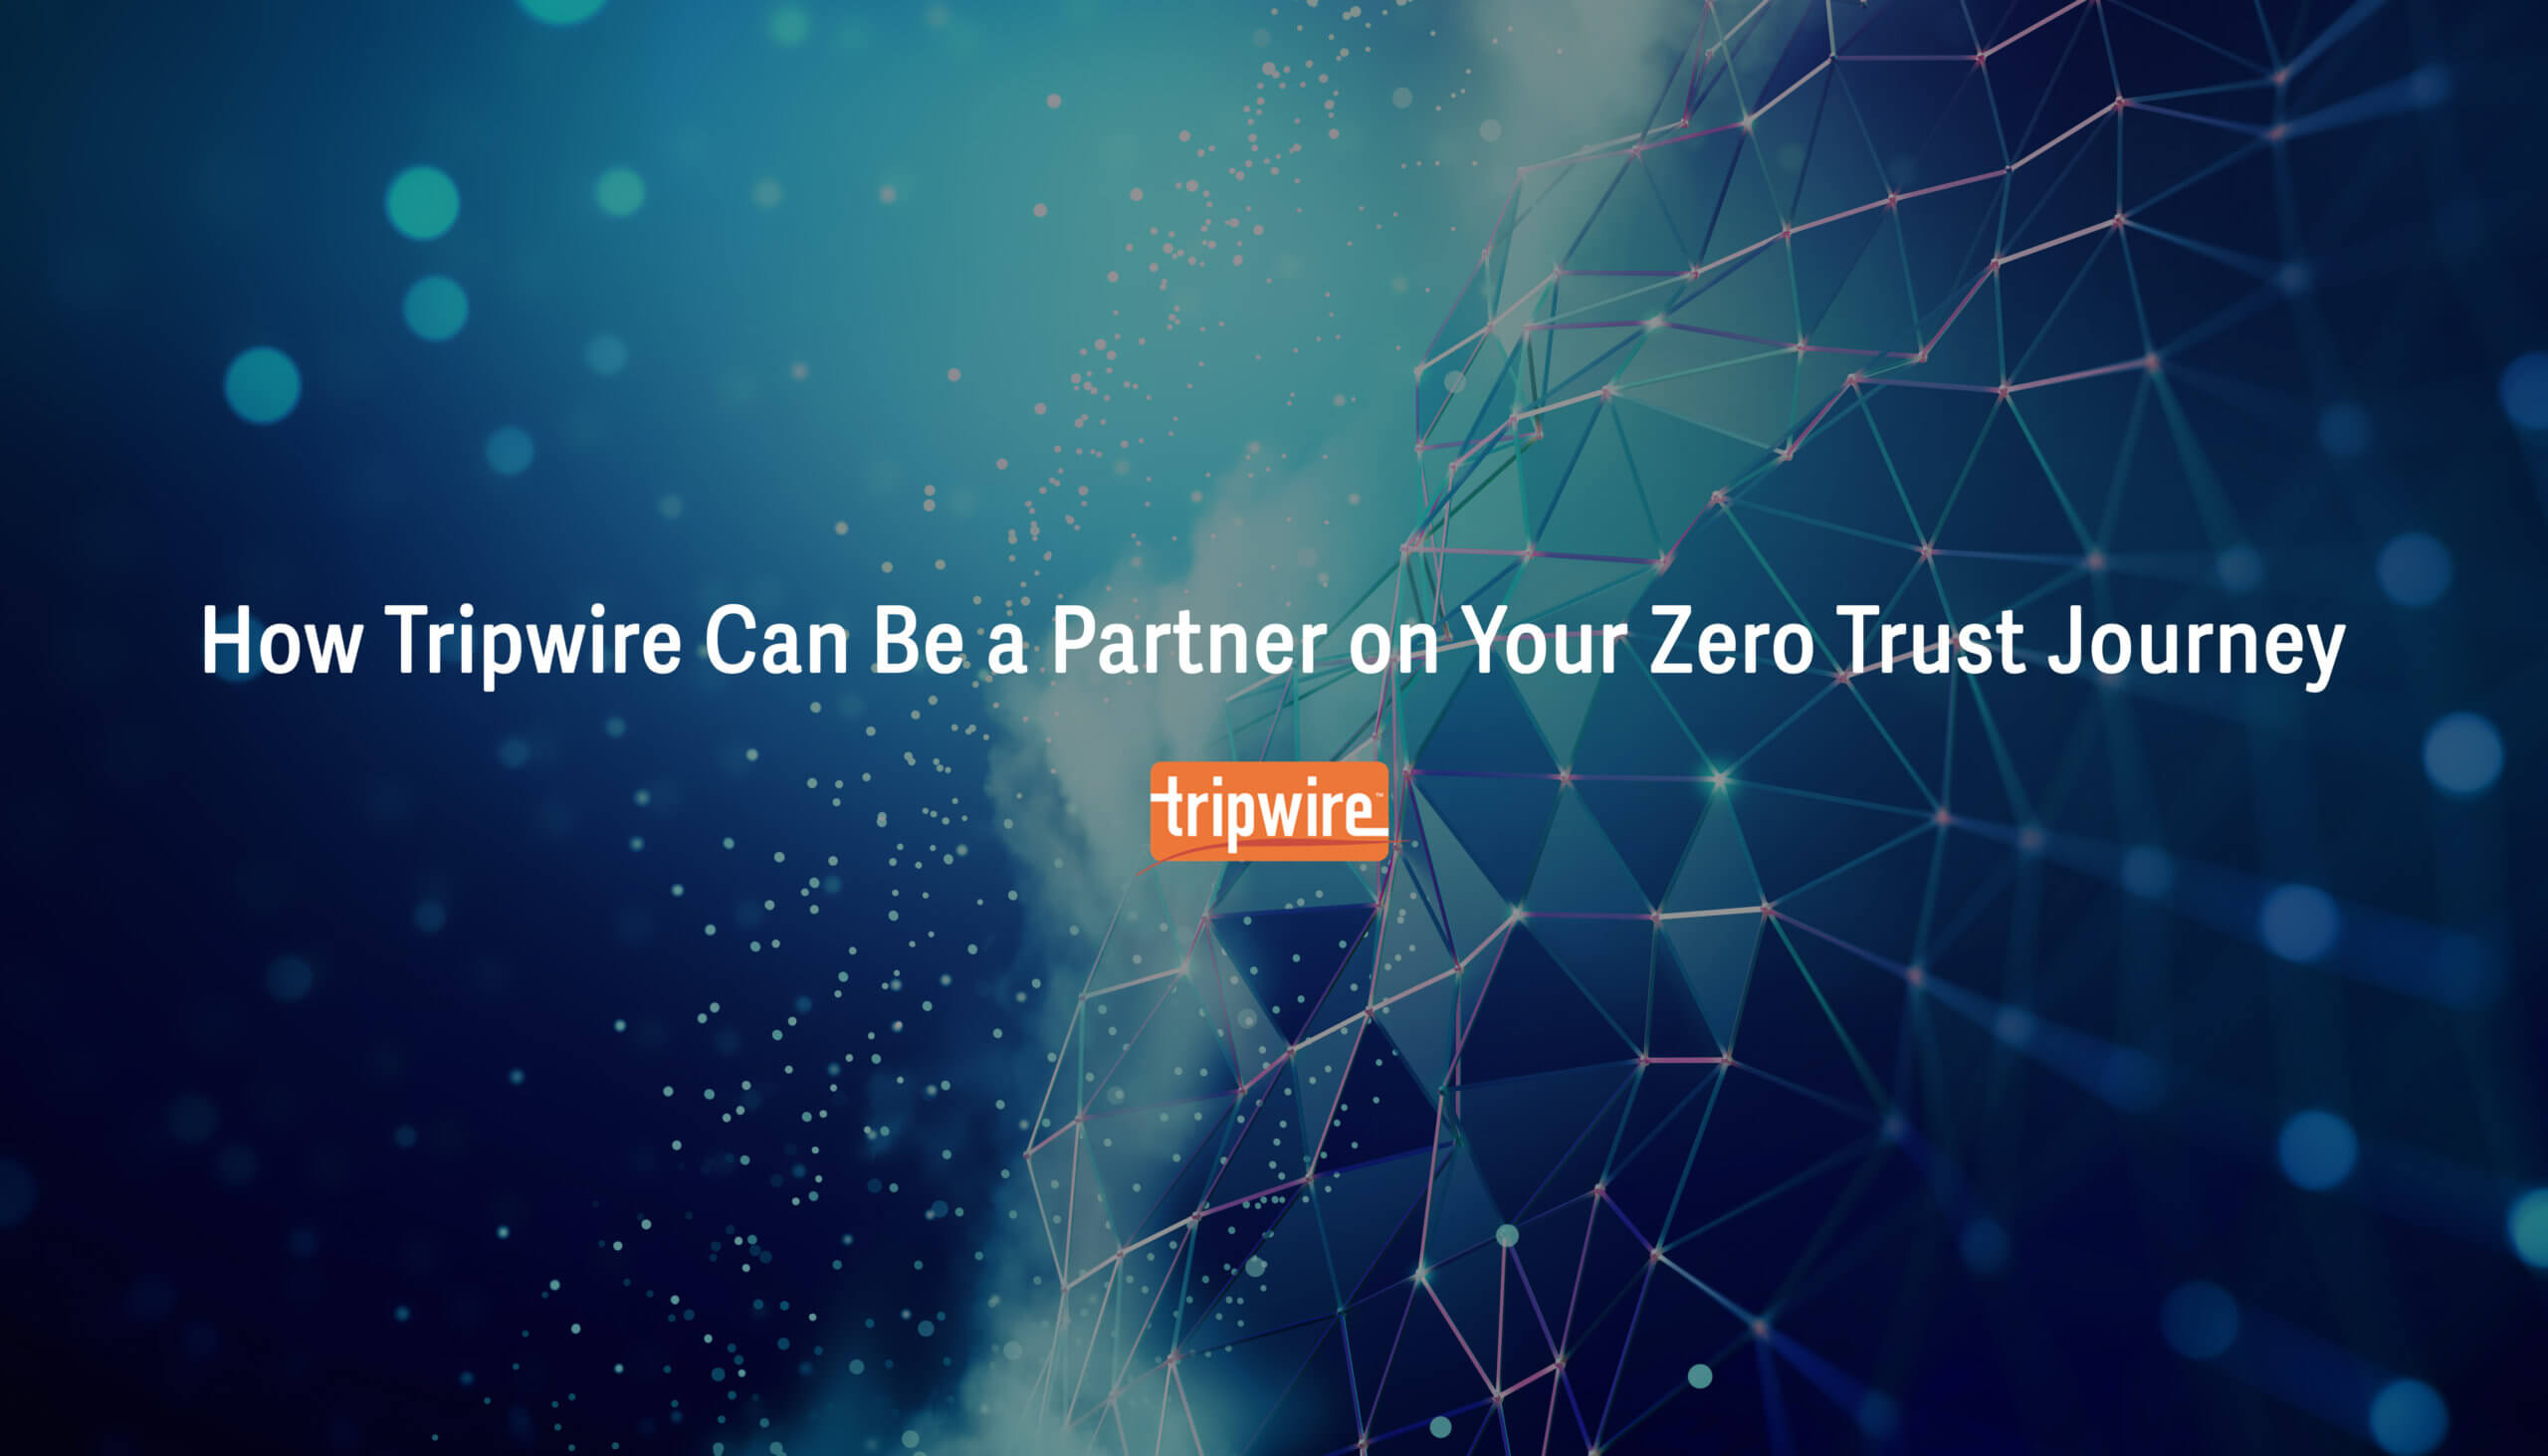 How Tripwire Can Be a Partner on Your Zero Trust Journey